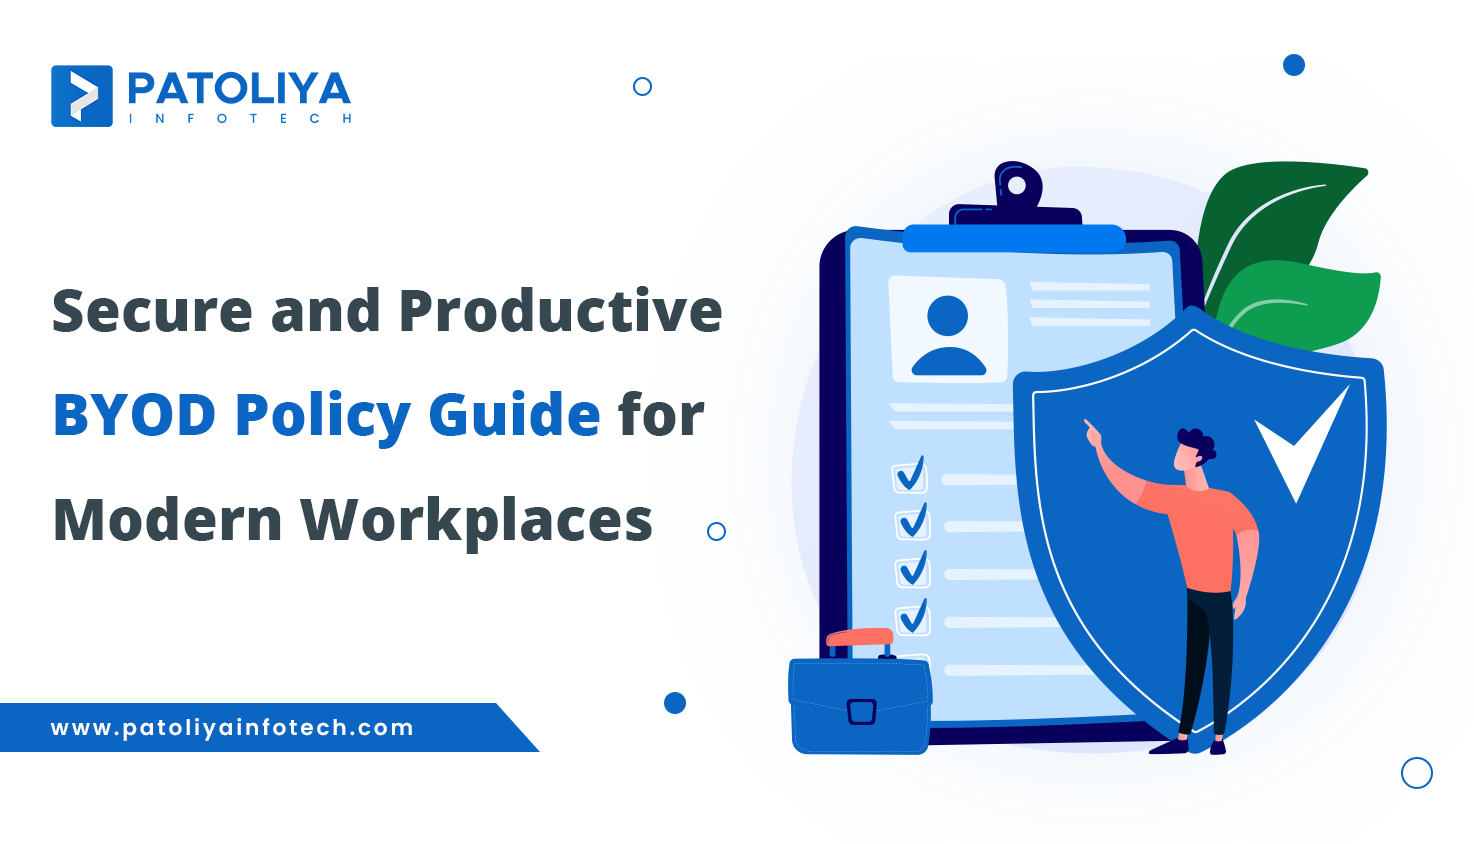 Secure and Productive BYOD Policy Guide for Modern Workplaces